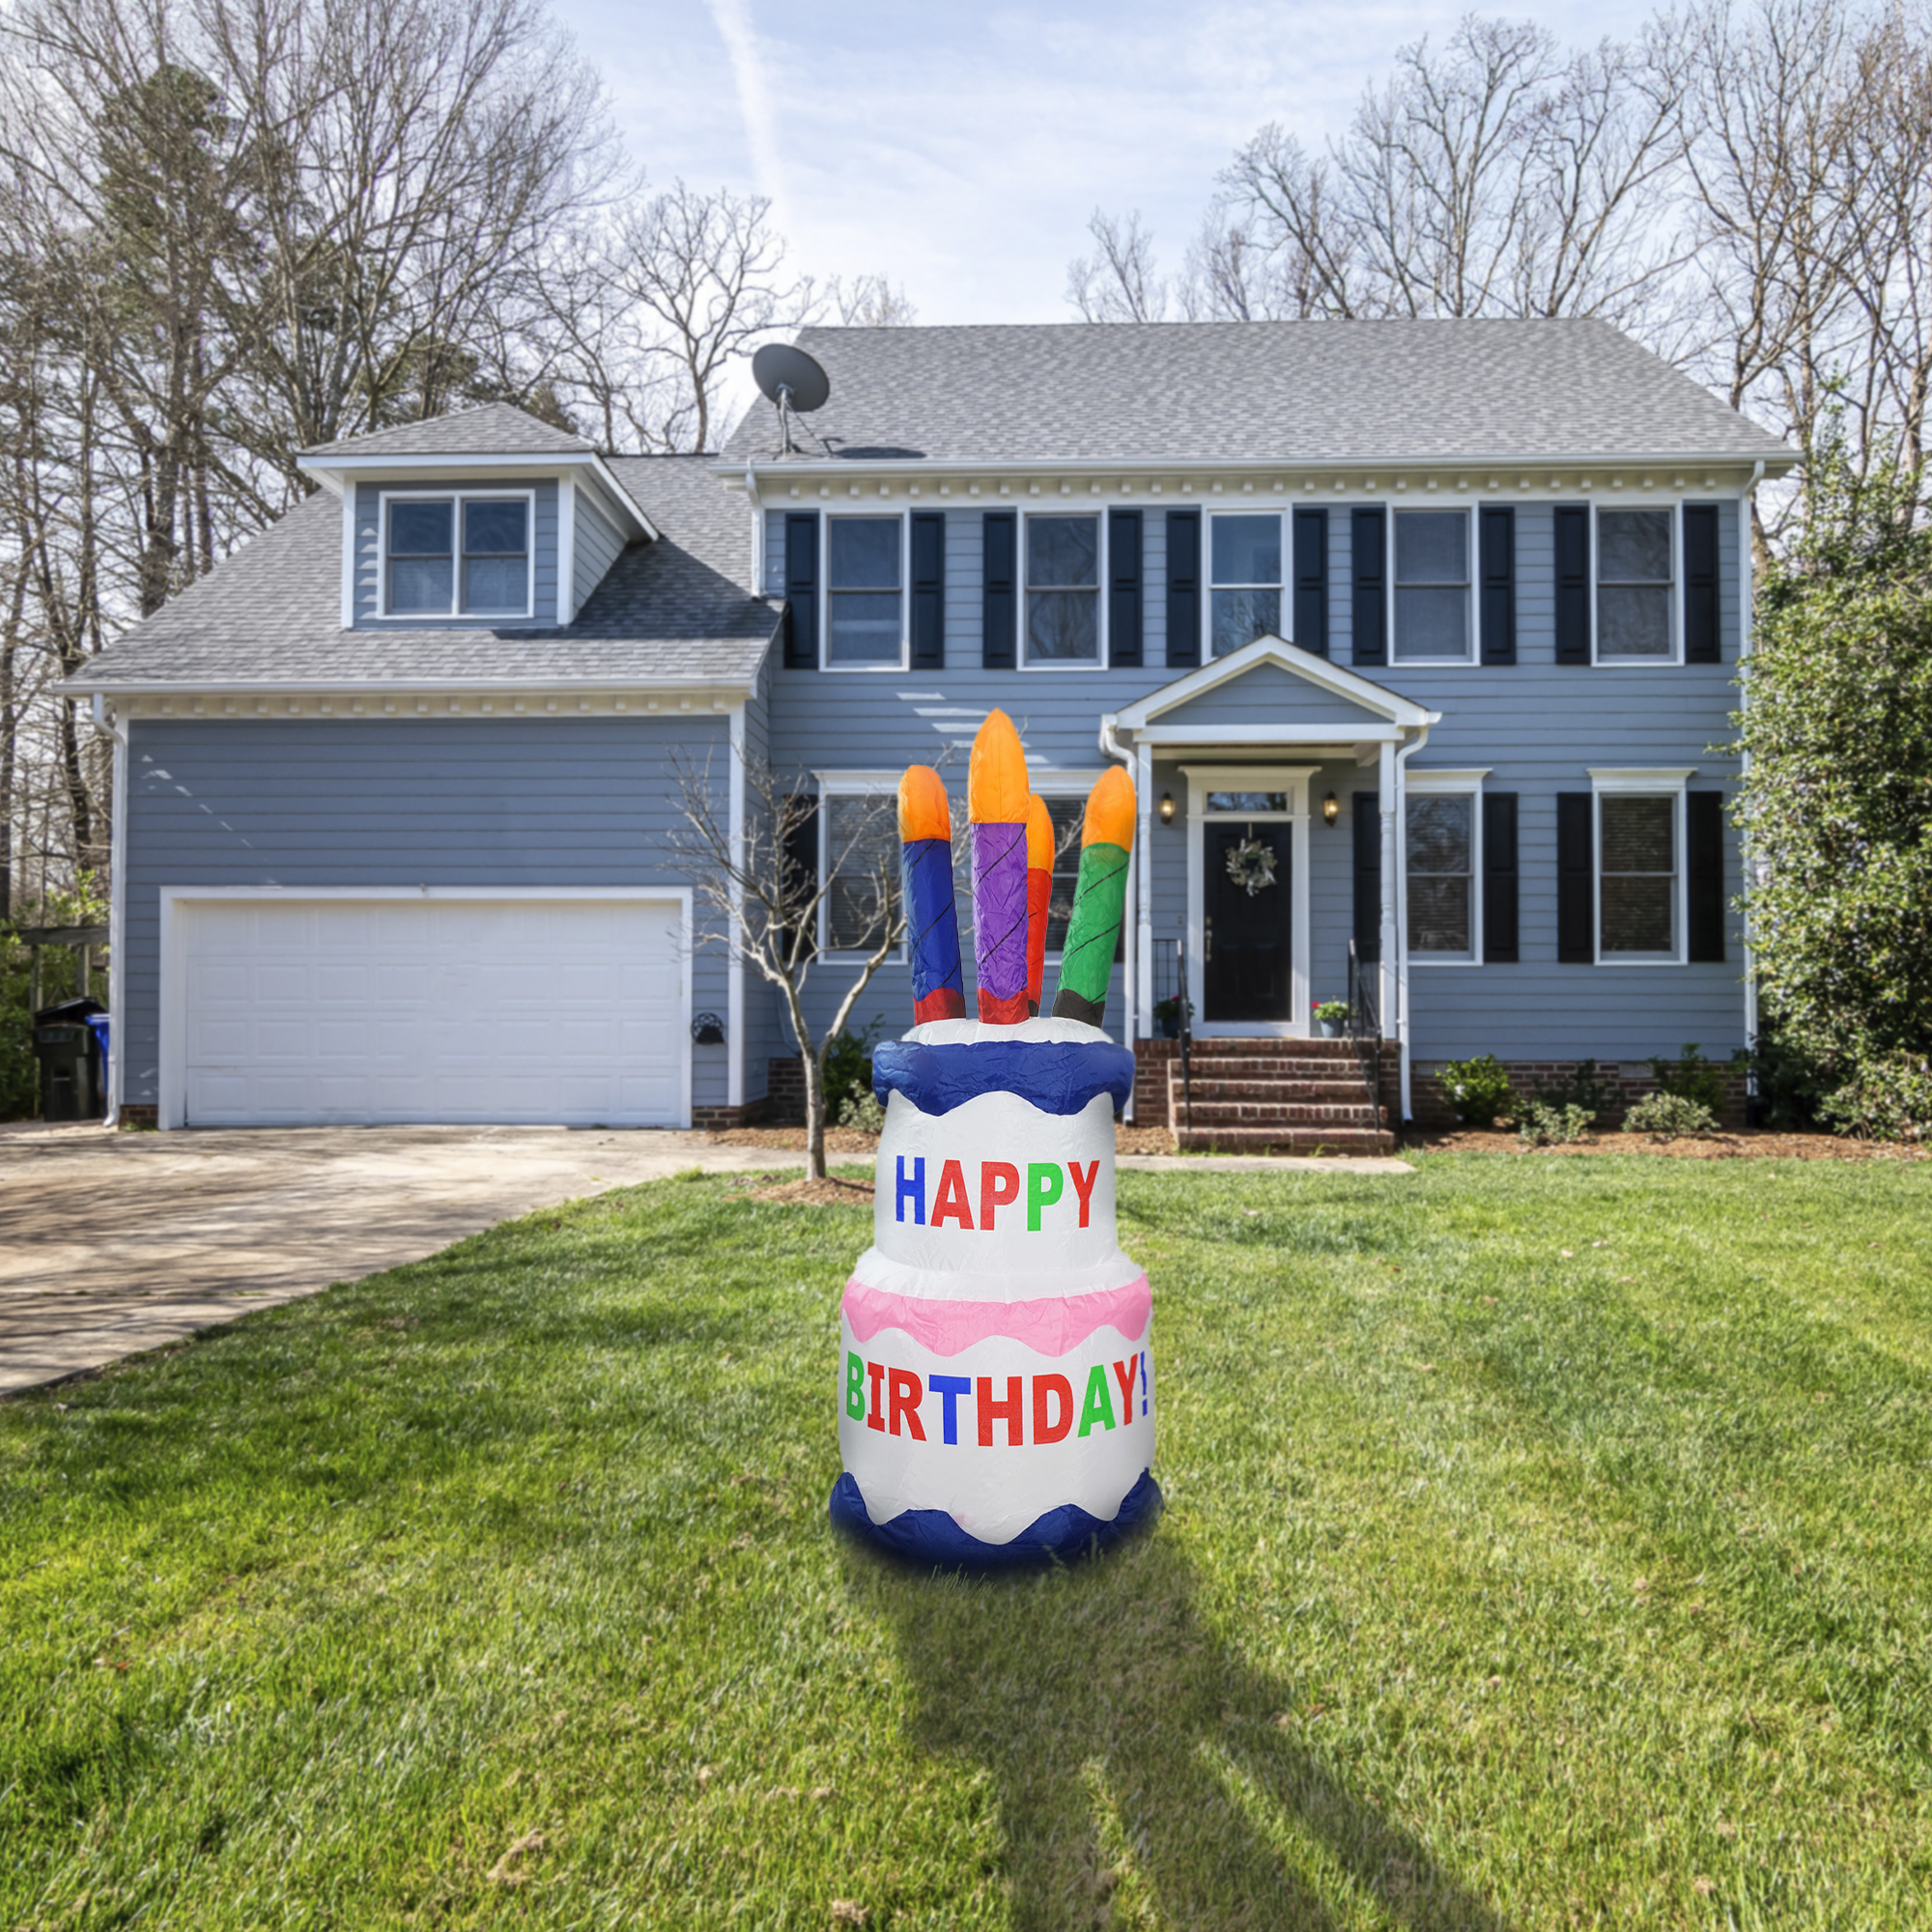 Northlight 4' Inflatable Lighted Happy Birthday Cake Outdoor Decoration - image 2 of 5